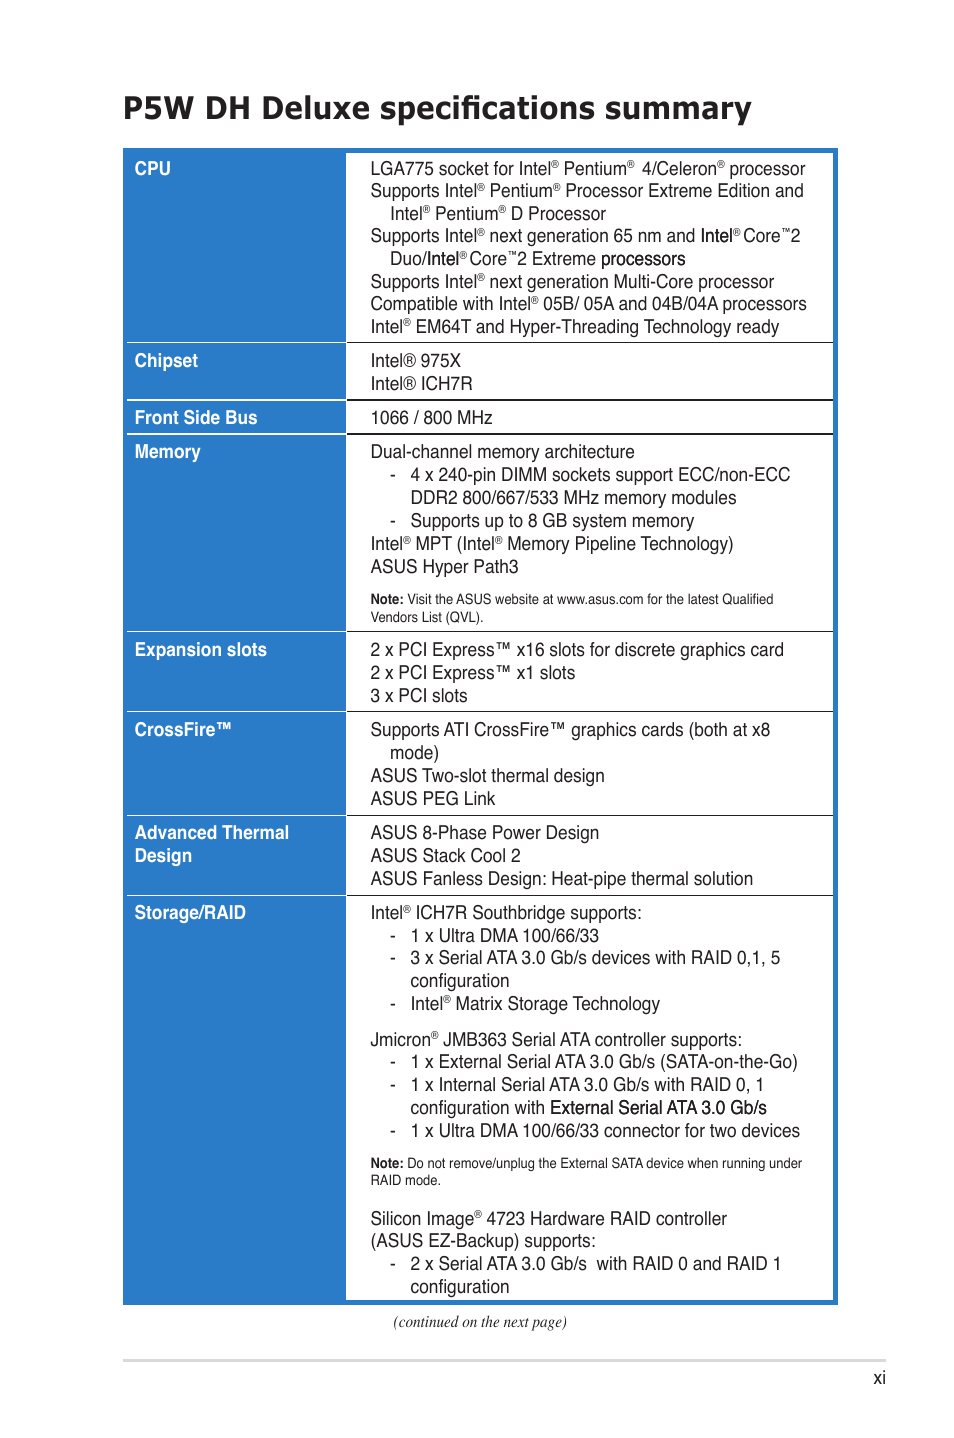 P5w dh deluxe specifications summary | Asus P5W DH Deluxe User Manual |  Page 11 / 212 | Original mode